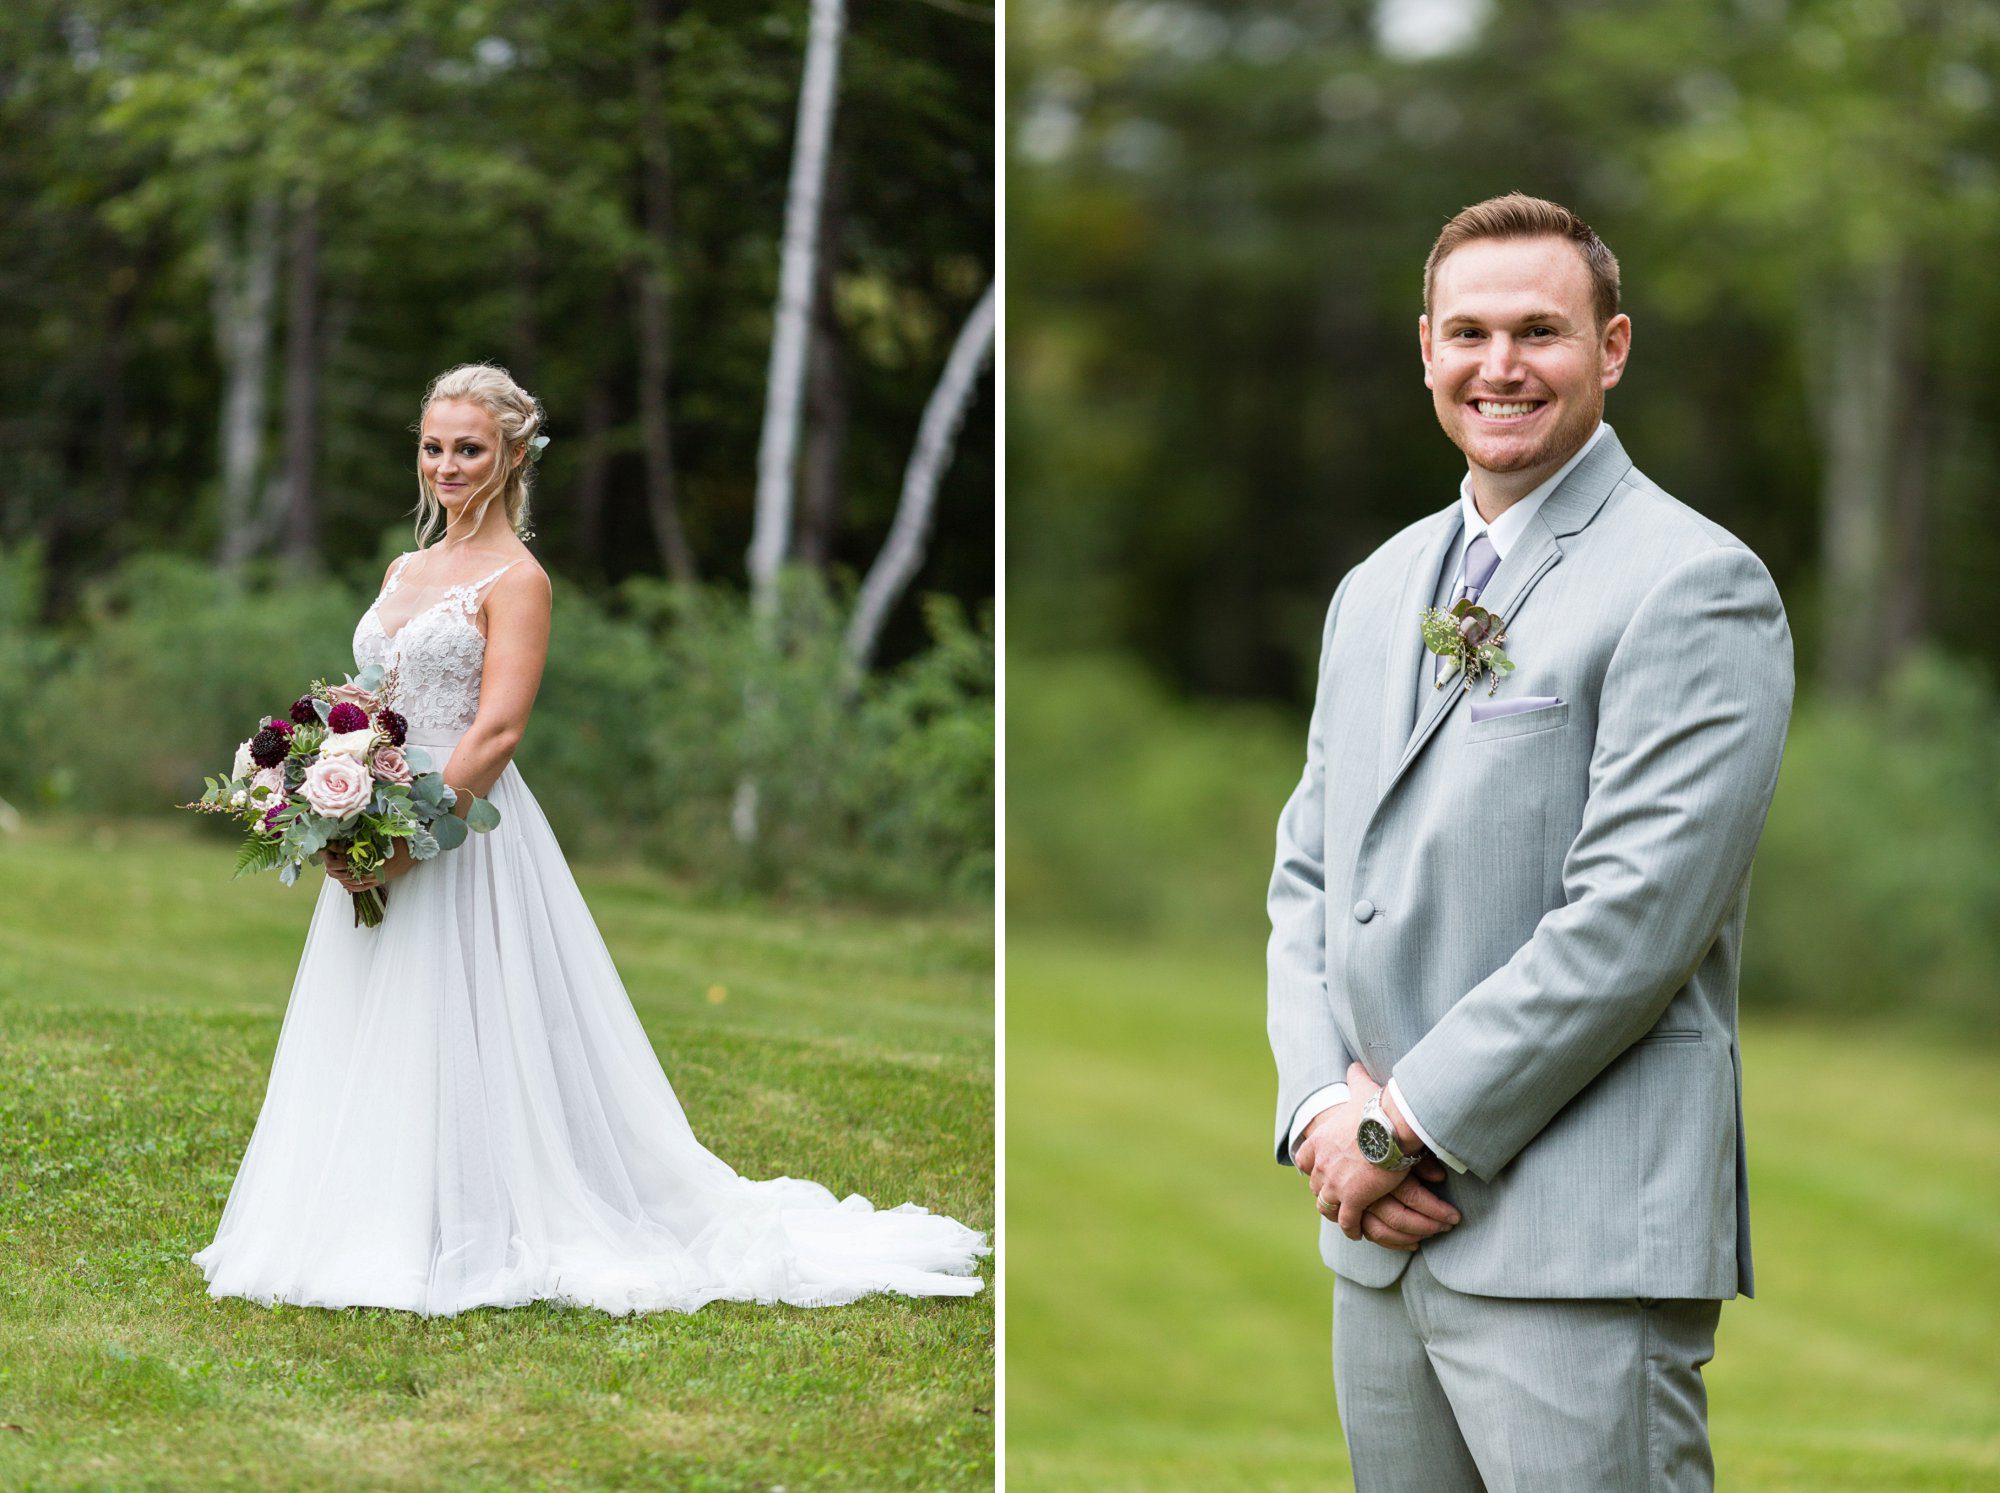 Bridal portraits at the Barn on the Pemi | Plymouth NH Wedding Photographer